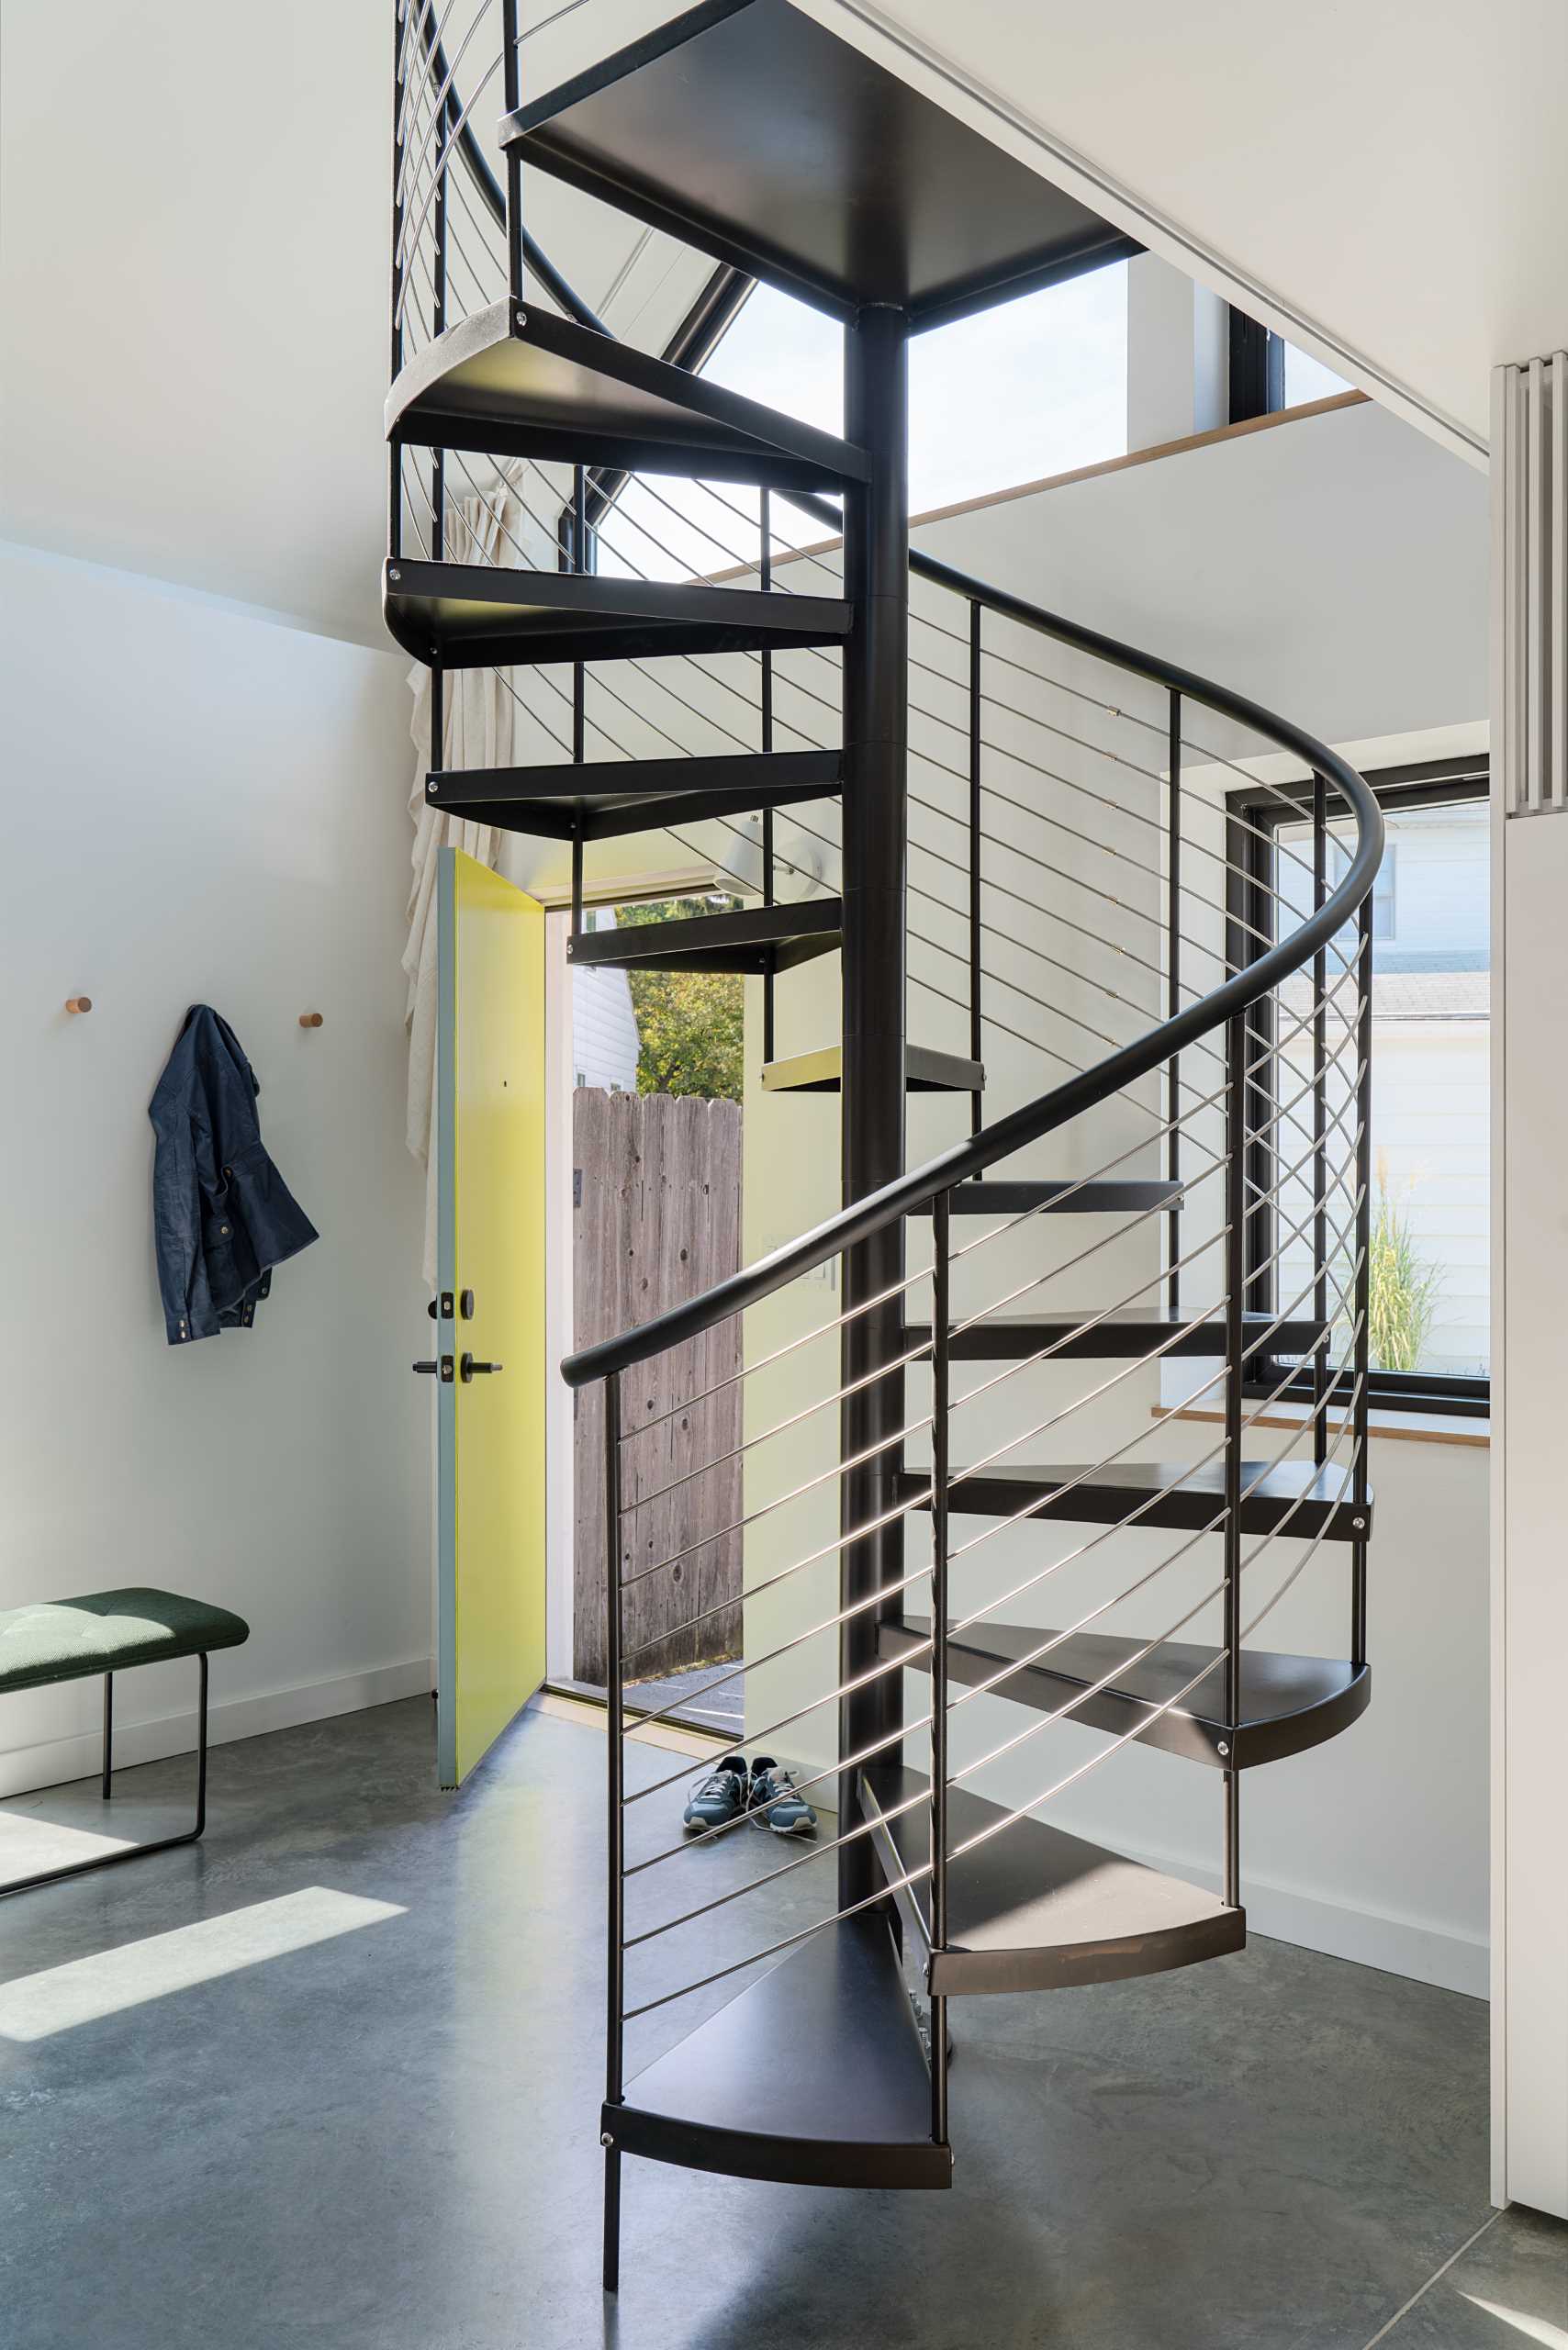 Black spiral stairs lead to a lofted home office and lounge.